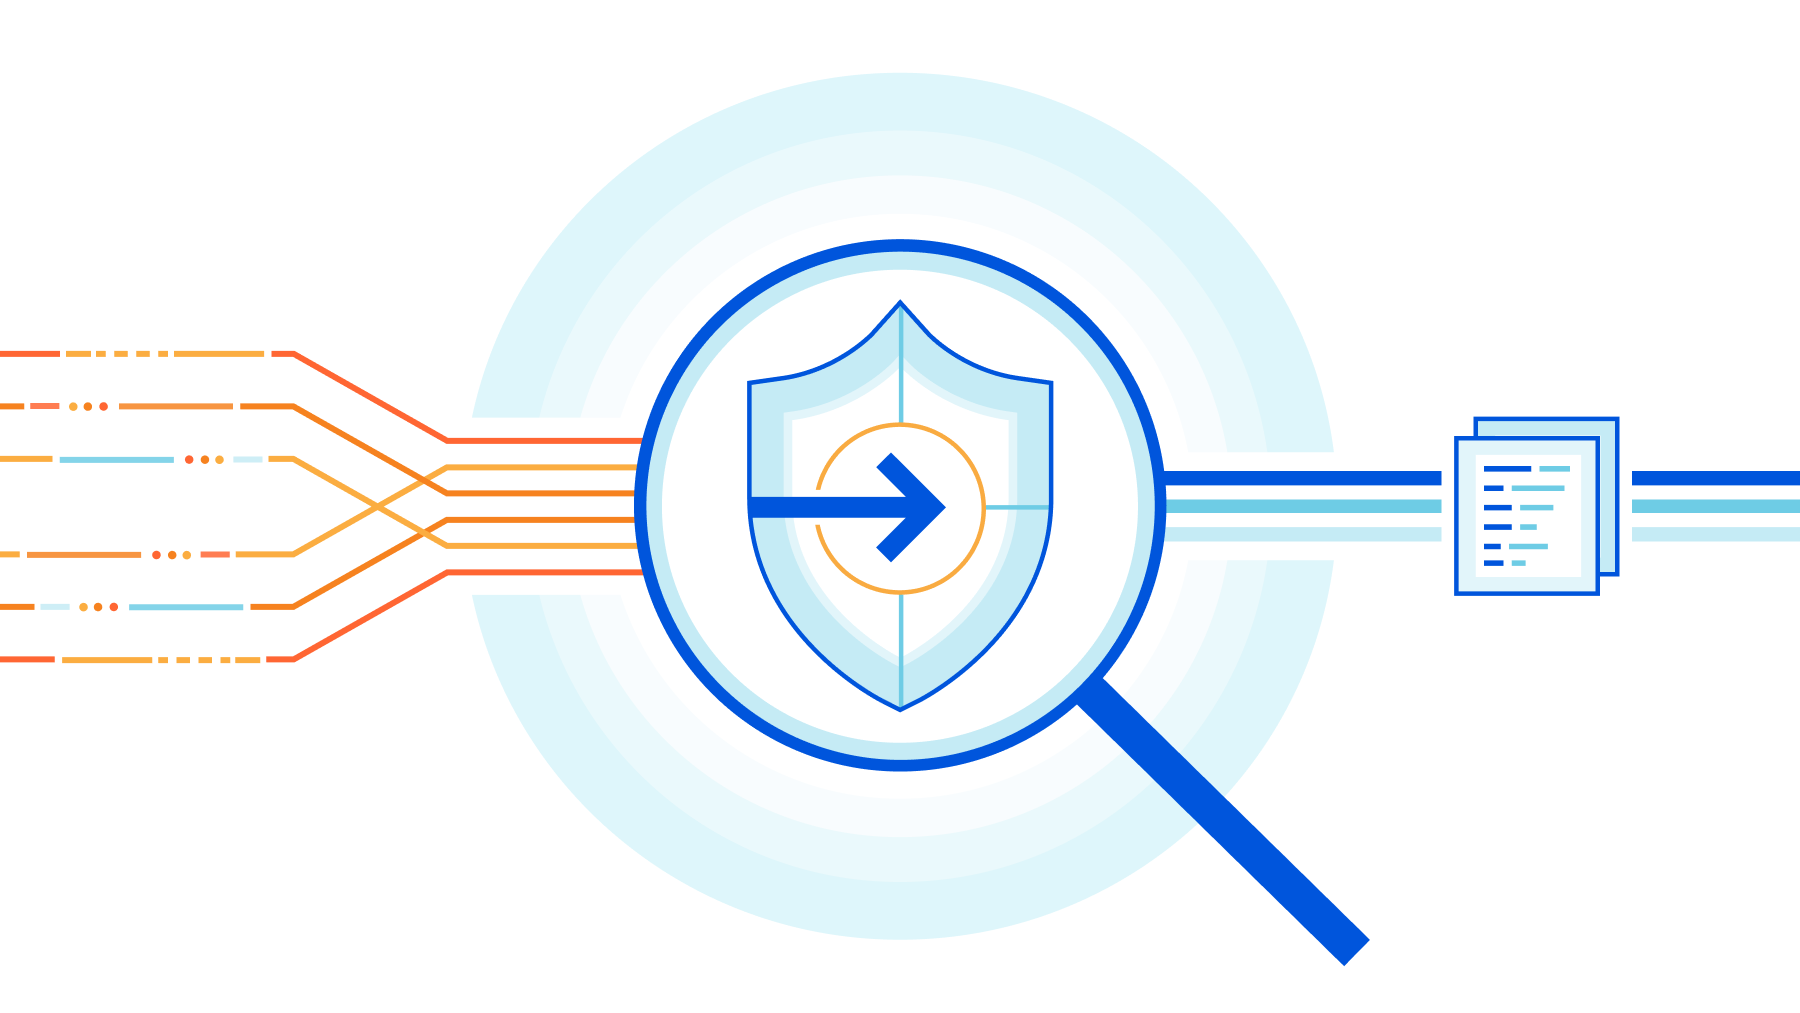 Next generation intrusion detection: an update on Cloudflare’s IDS capabilities